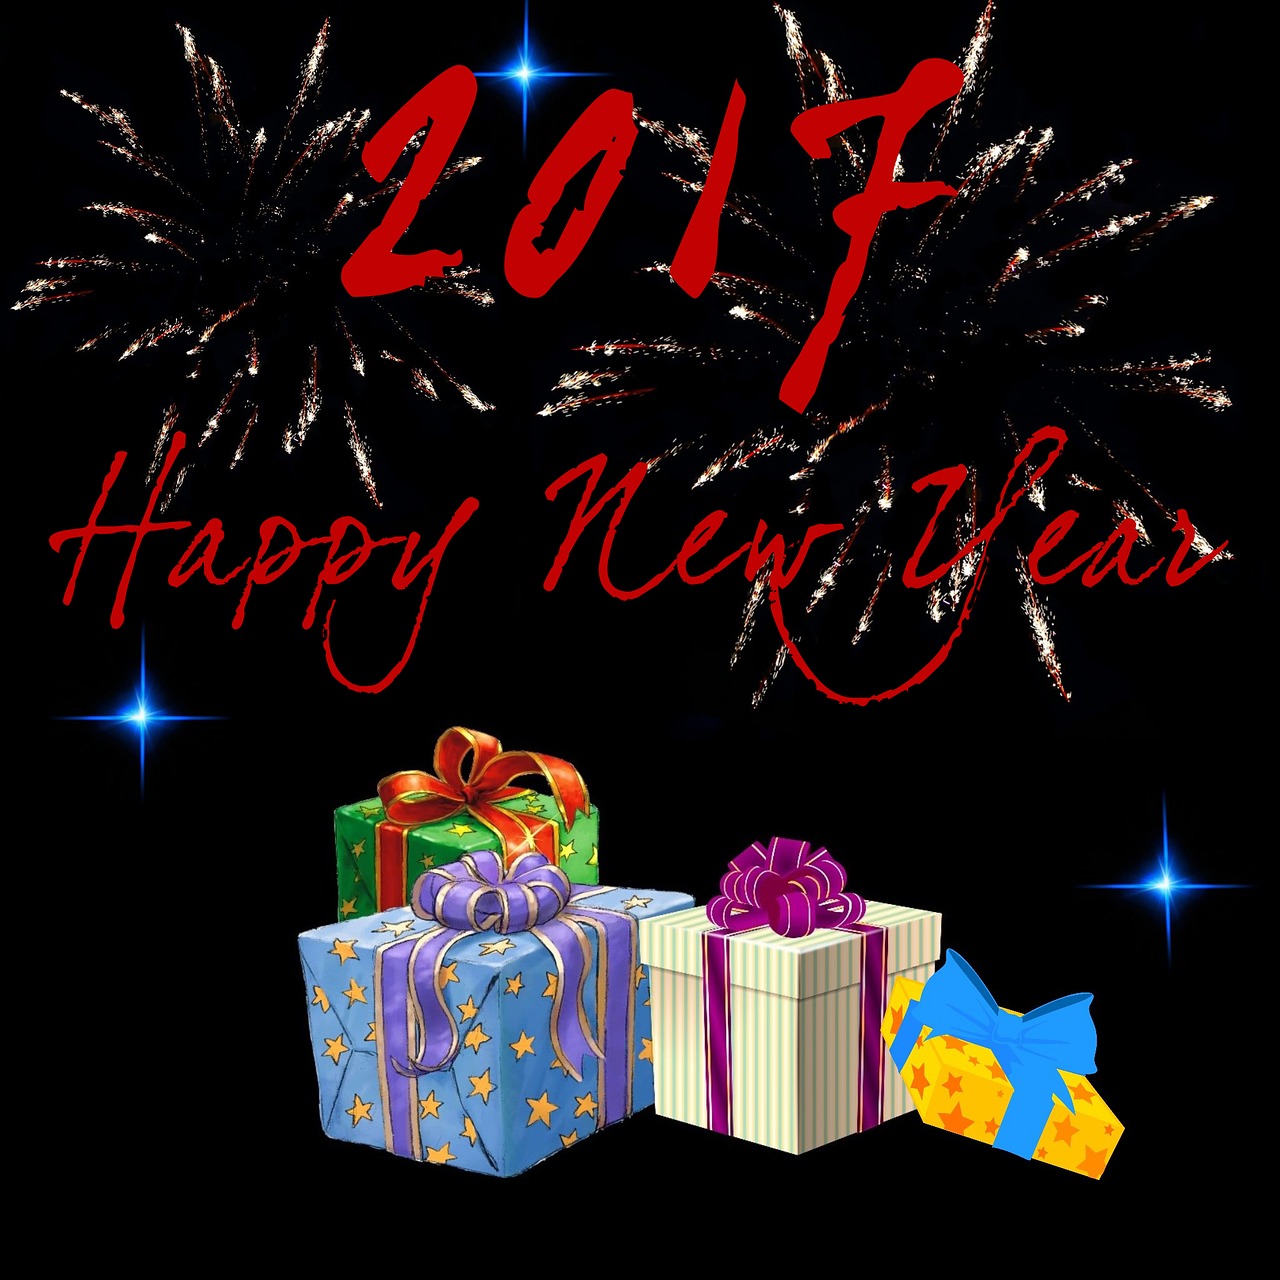 greeting new year best wishes free photo